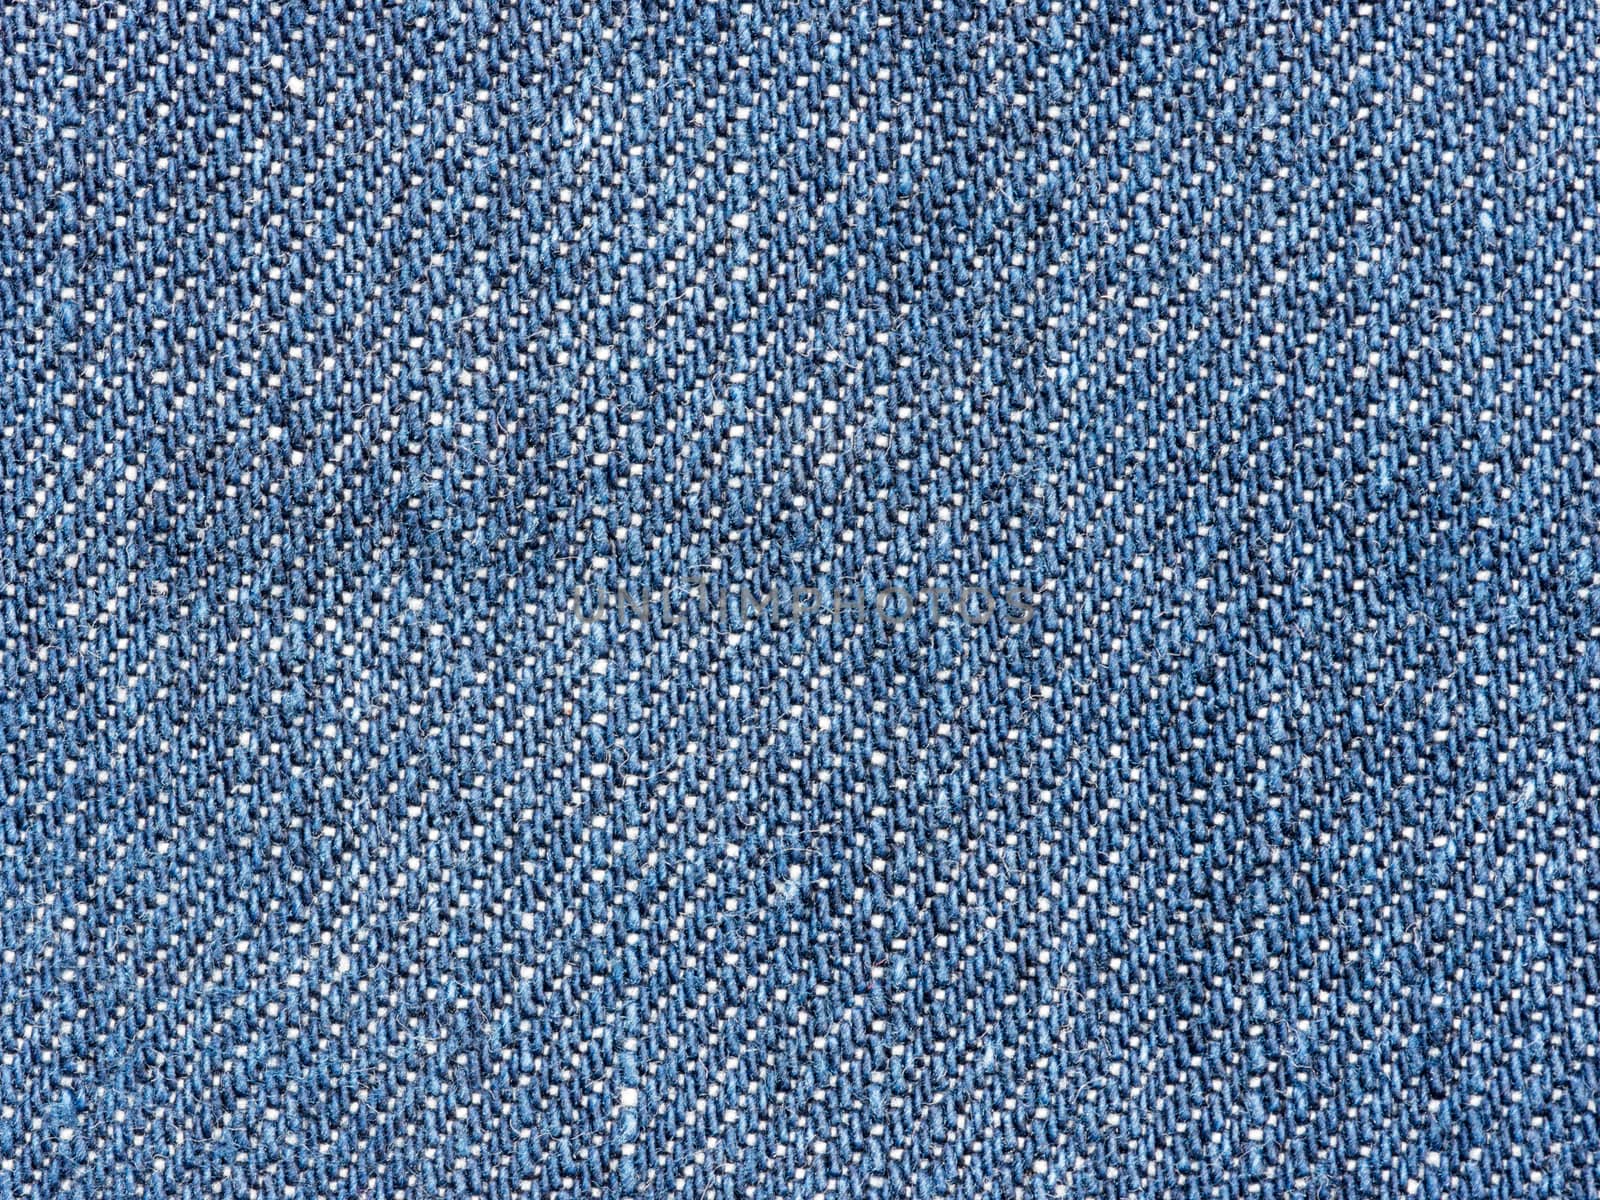 Texture of denim jeans close up by fascinadora